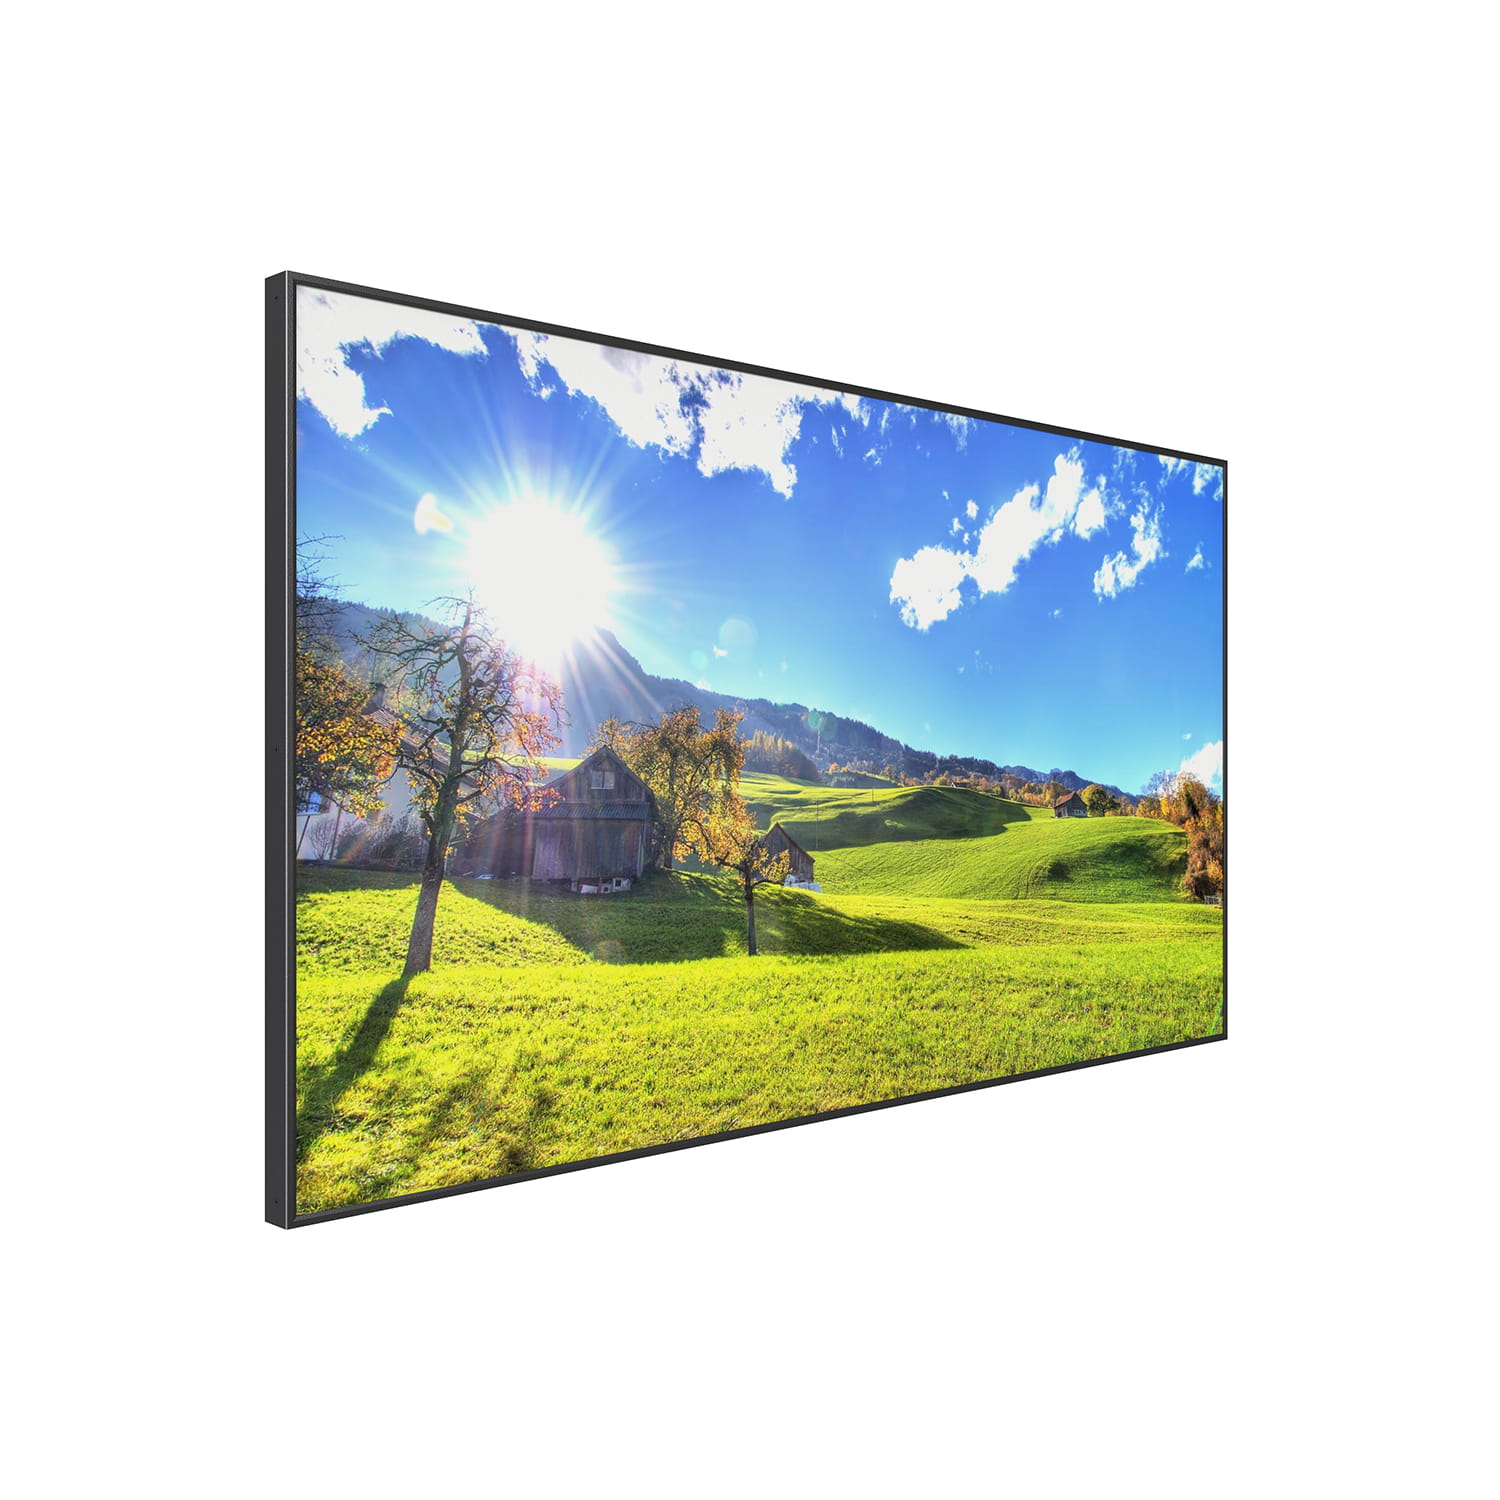 KUVASONG 49" Sun Readable Smart Outdoor TV for Outdoor Covered Area, 49" High Brightness Smart Outdoor Television - image 3 of 4